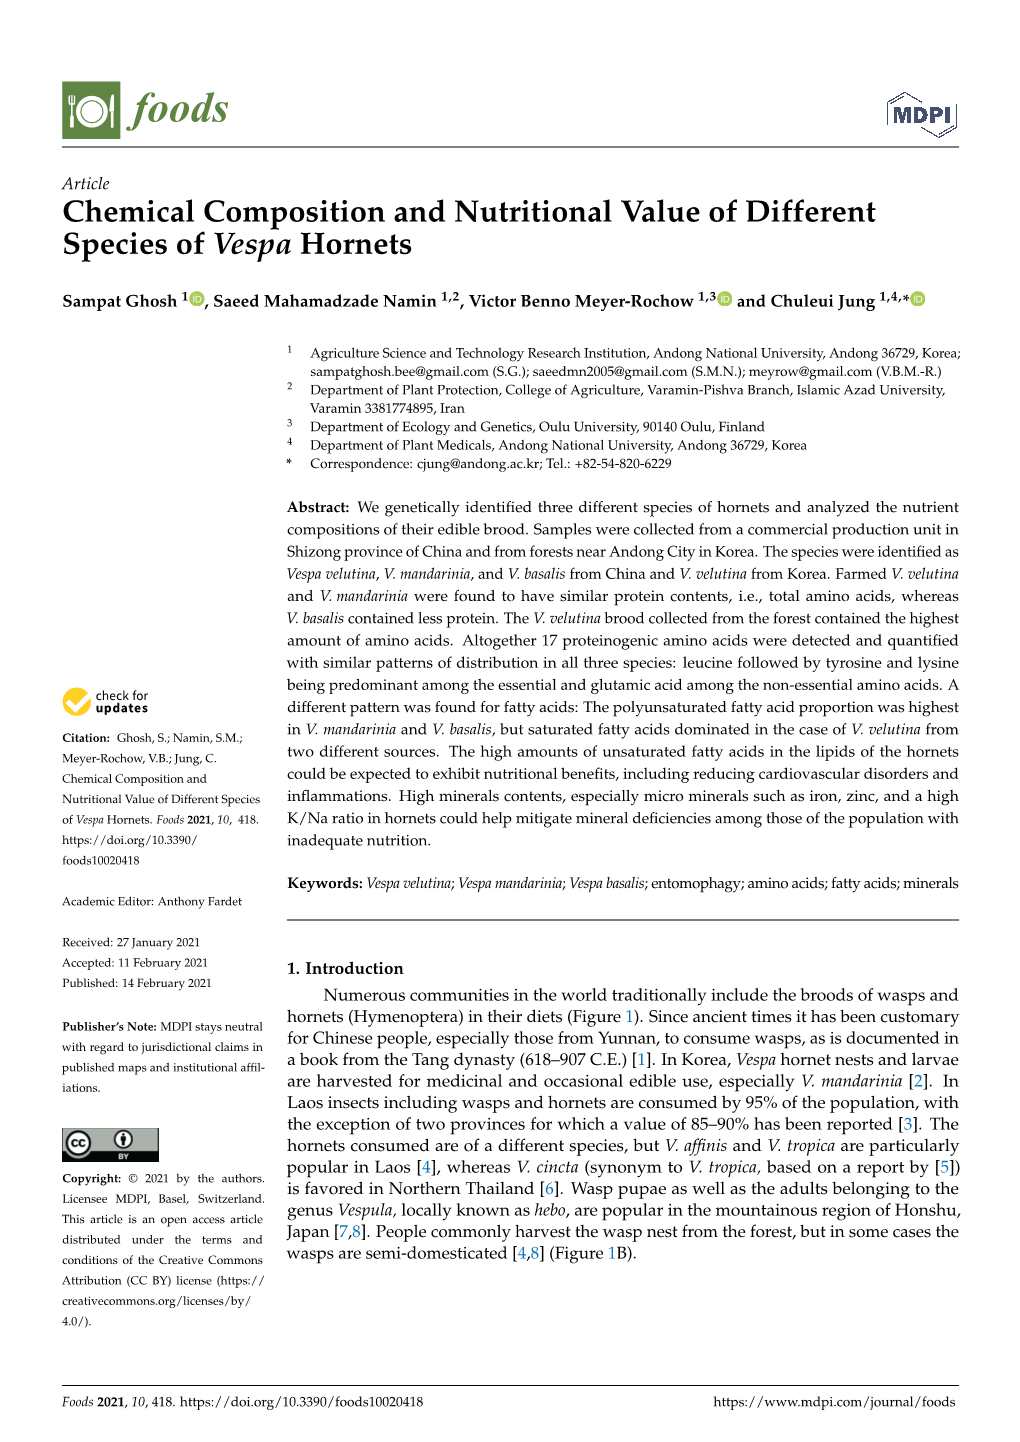 Chemical Composition and Nutritional Value of Different Species of Vespa Hornets